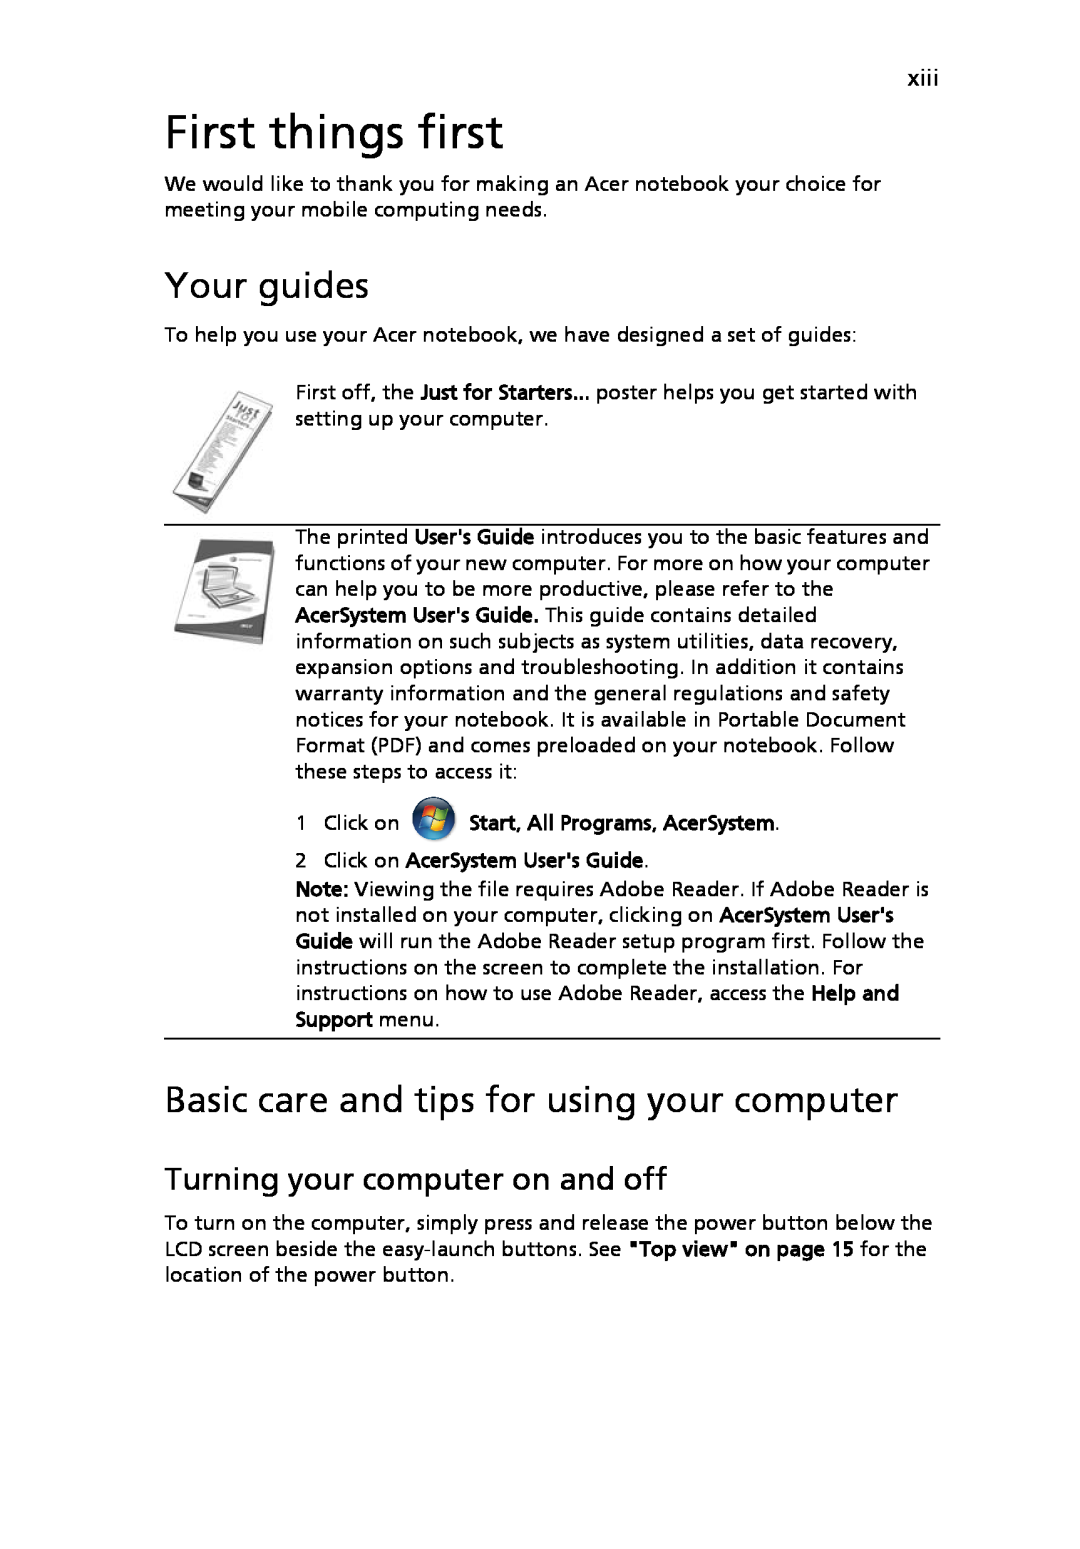 Acer 5220 First things first, Your guides, Basic care and tips for using your computer, Turning your computer on and off 